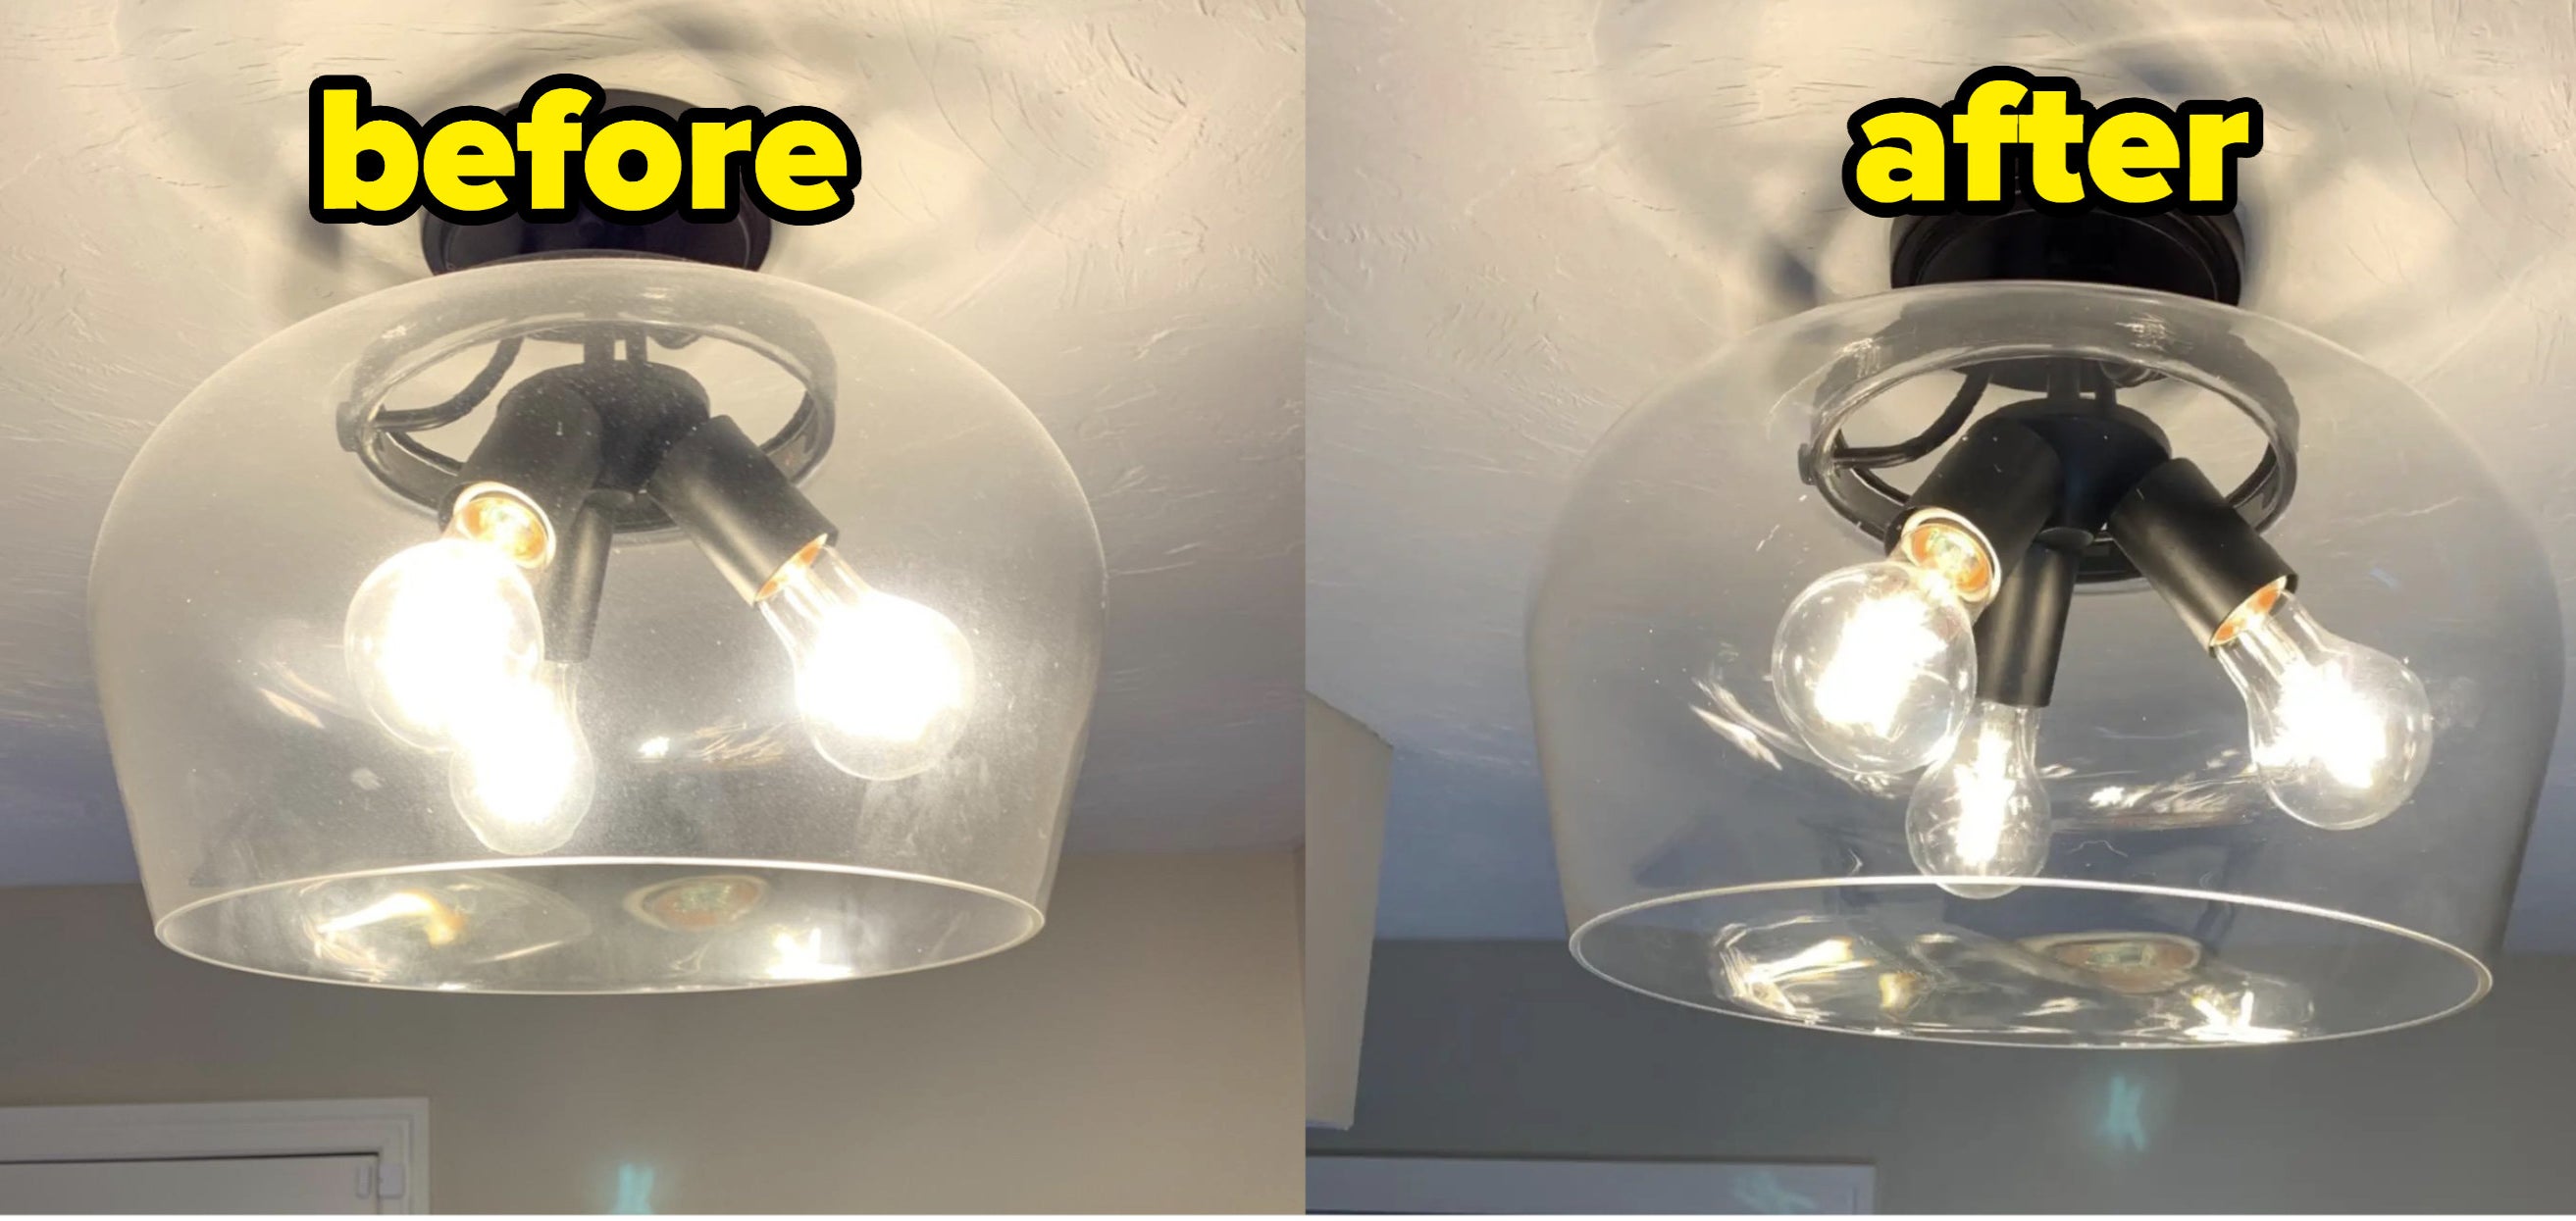 a reviewer photo of a light fixture before and after using the rag